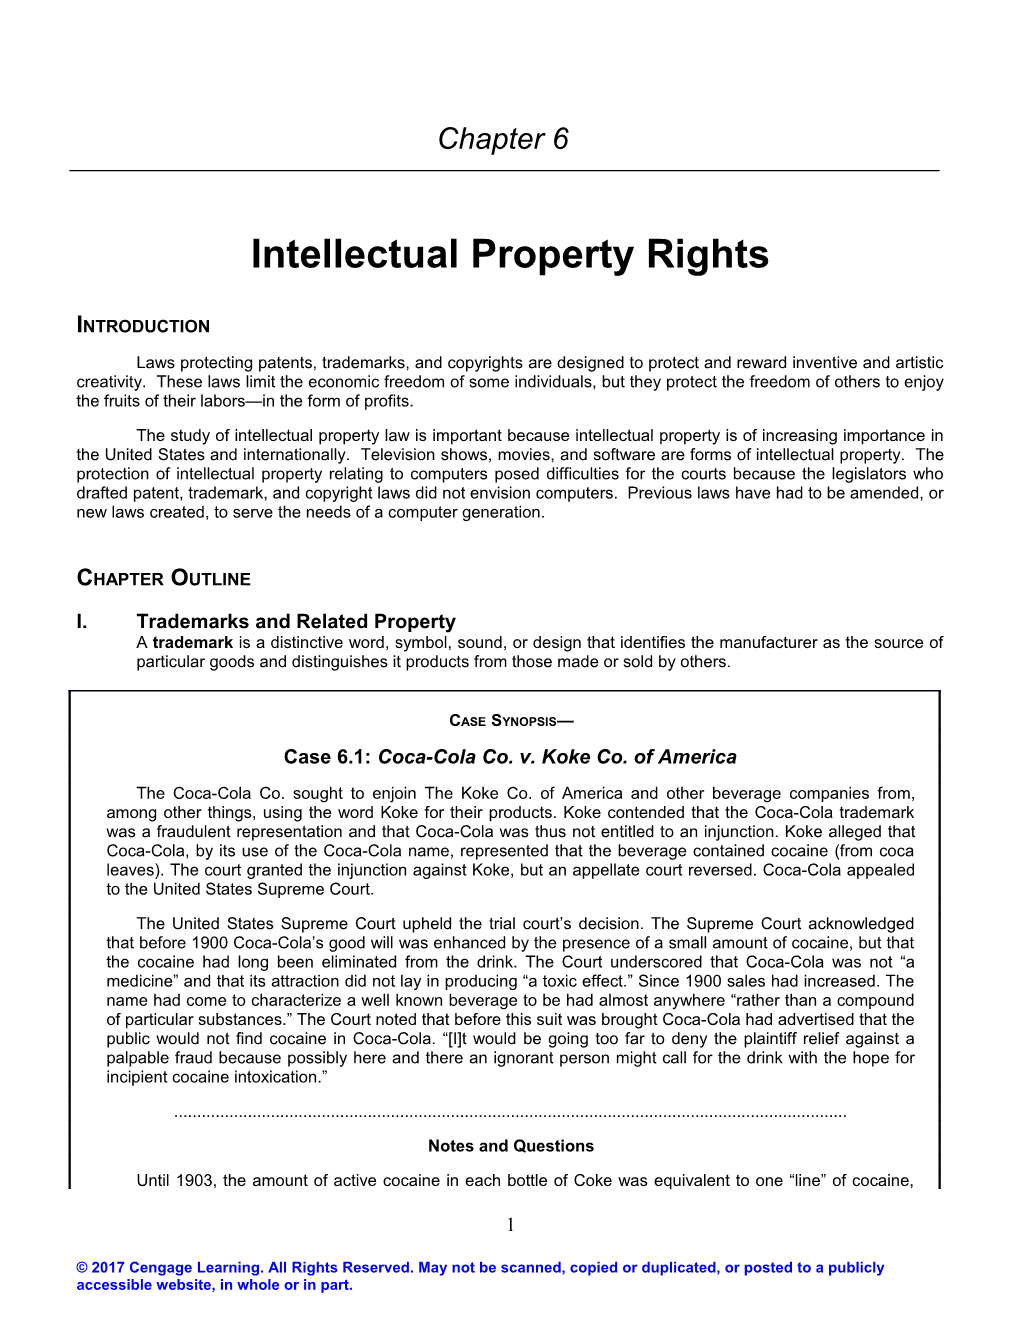 Chapter 6: Intellectual Property Rights 21